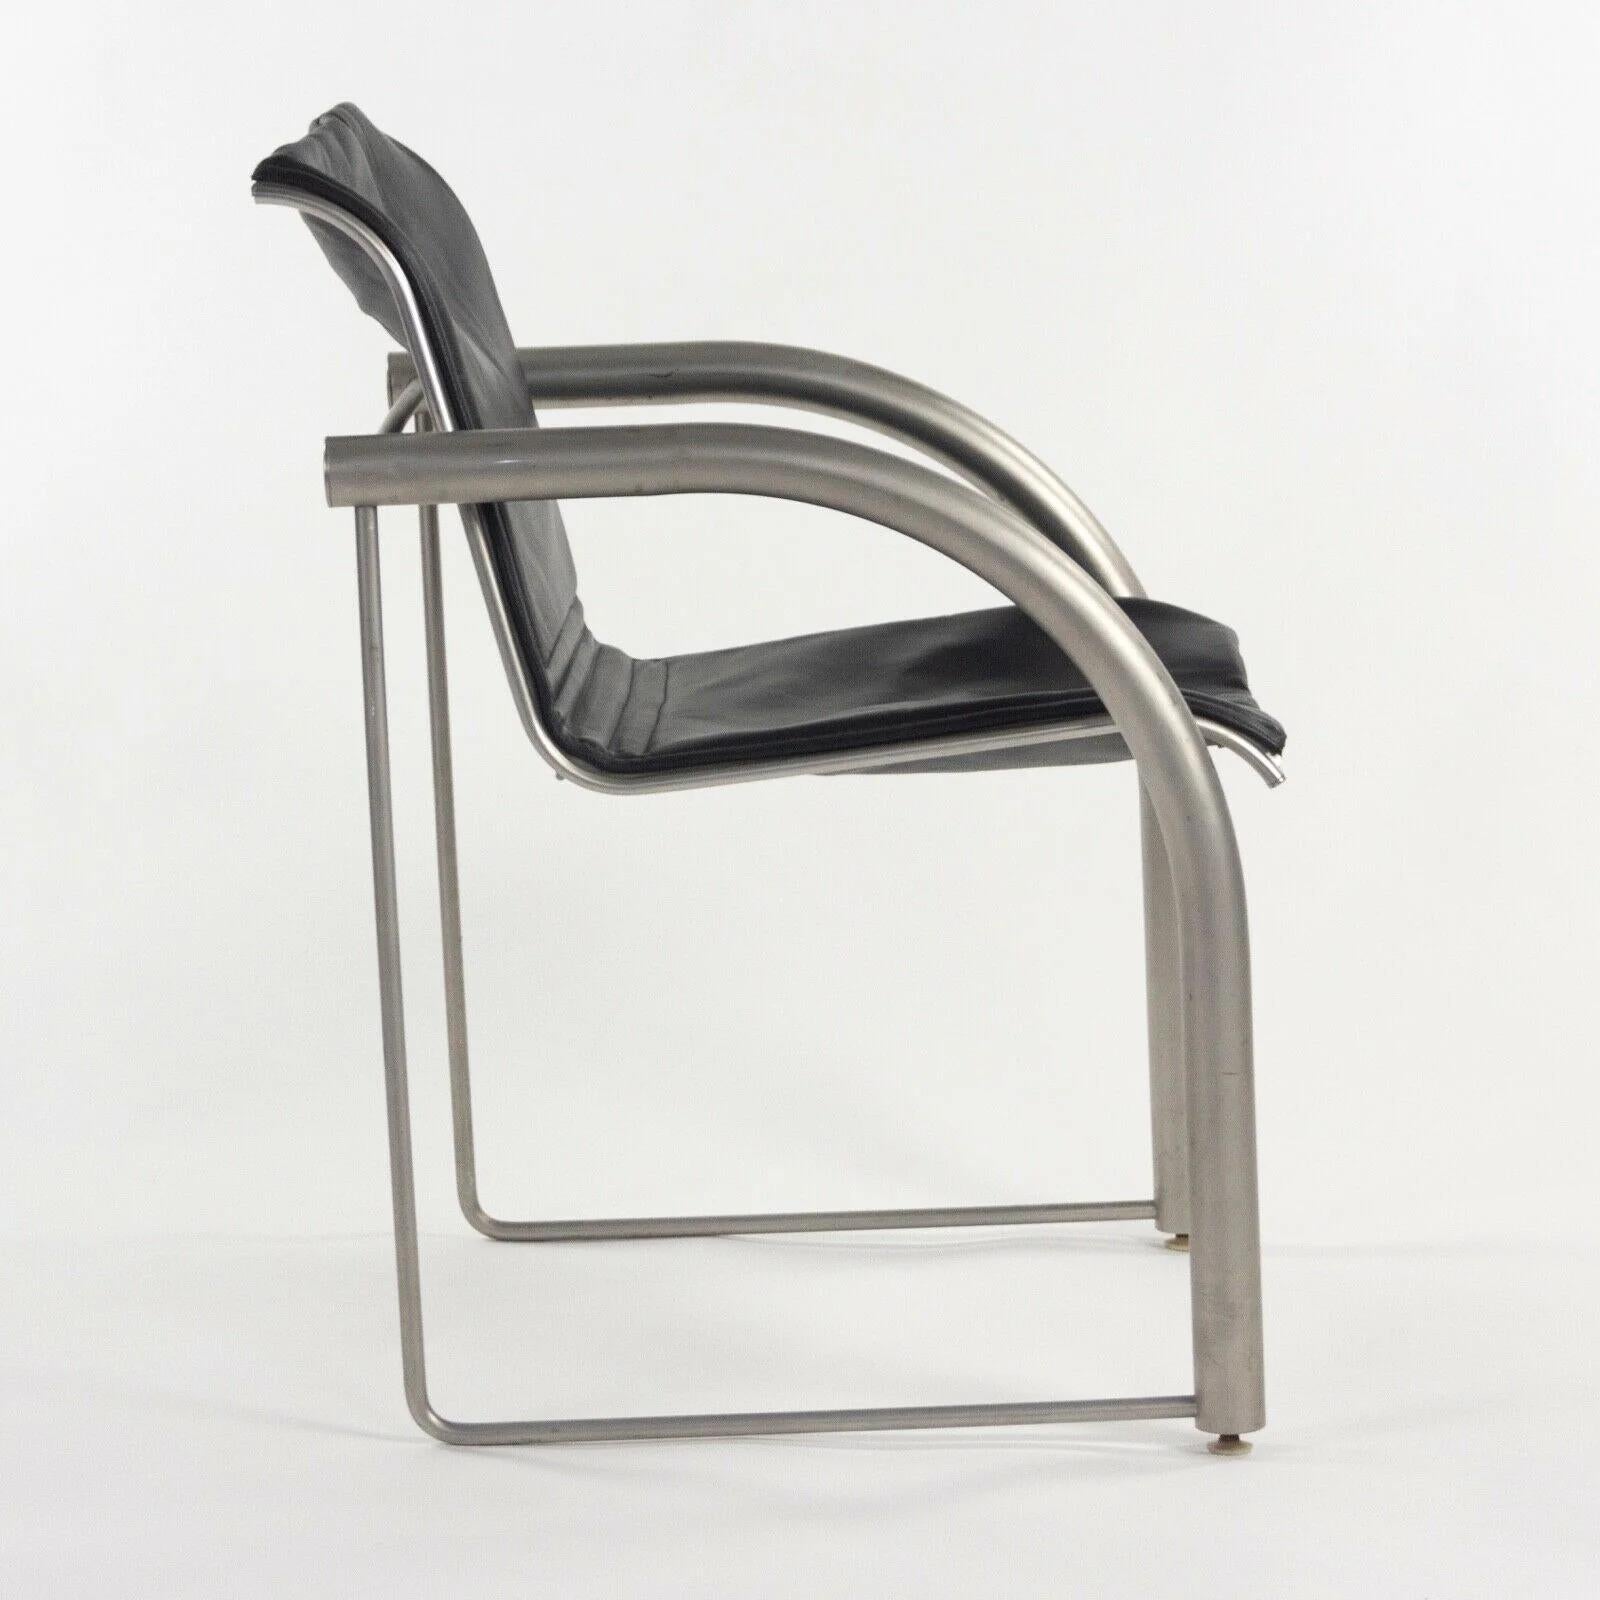 American Prototype Richard Schultz 2002 Collection Stainless & Leather Dining Chair For Sale